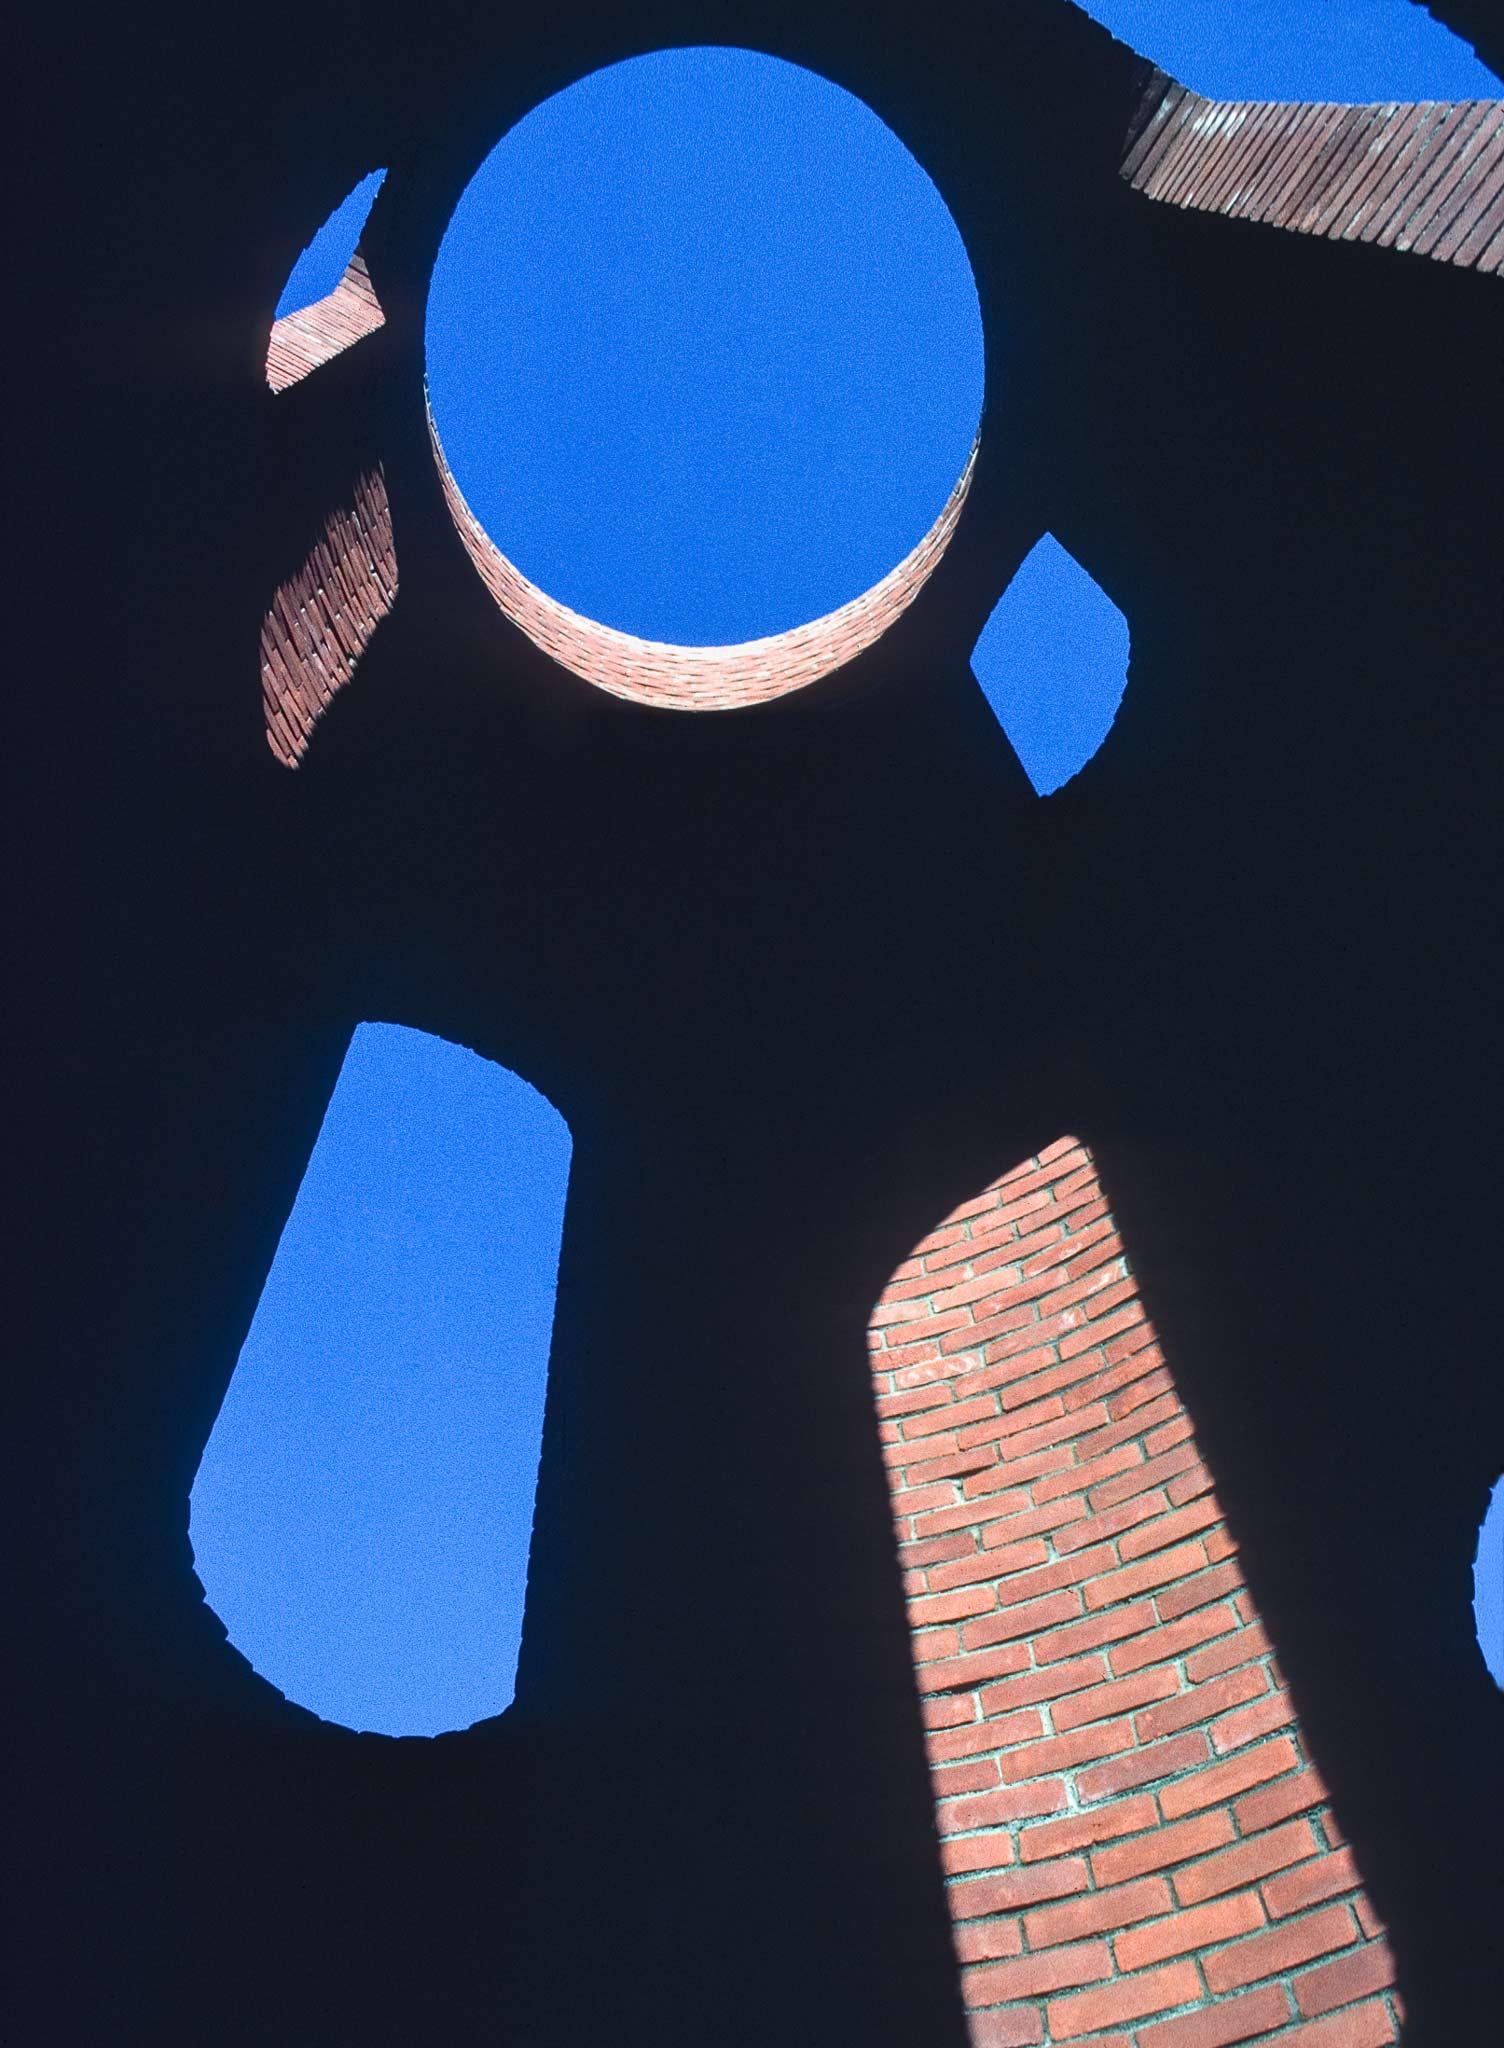 Interior view of a tall circular brick structure with a circular oculus at the top